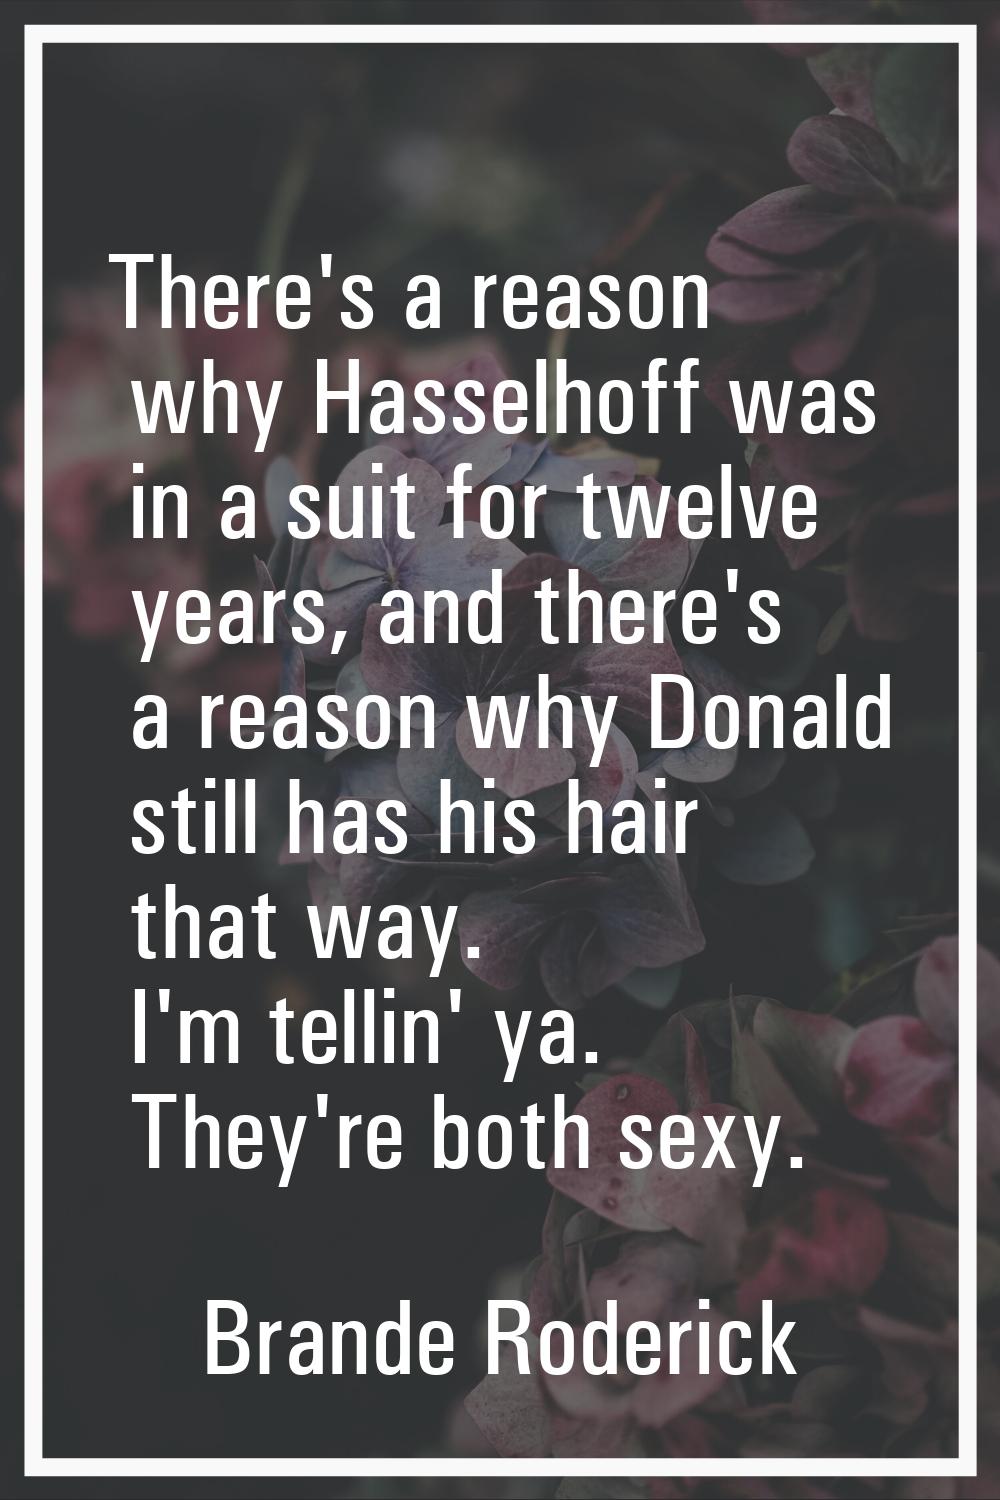 There's a reason why Hasselhoff was in a suit for twelve years, and there's a reason why Donald sti